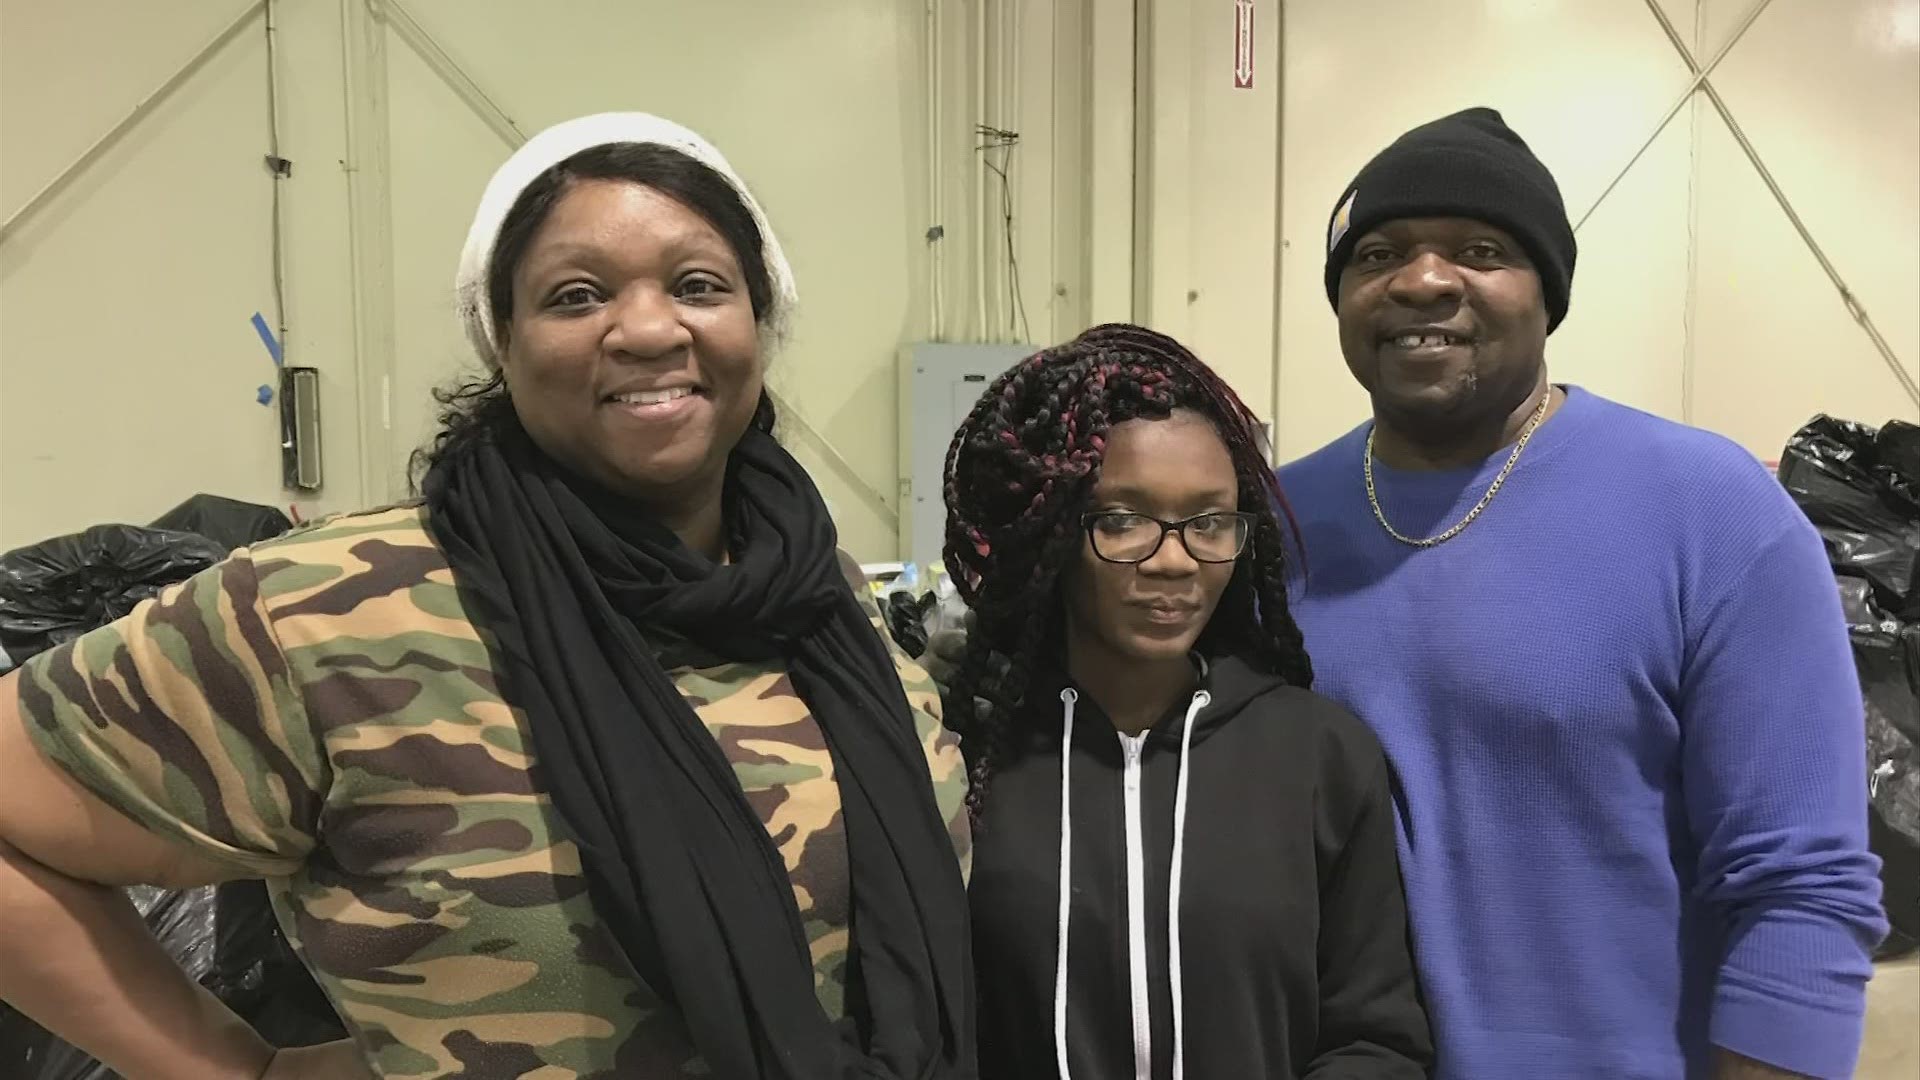 The Overstreet family says they've been volunteering at Salvation Army since 2001.